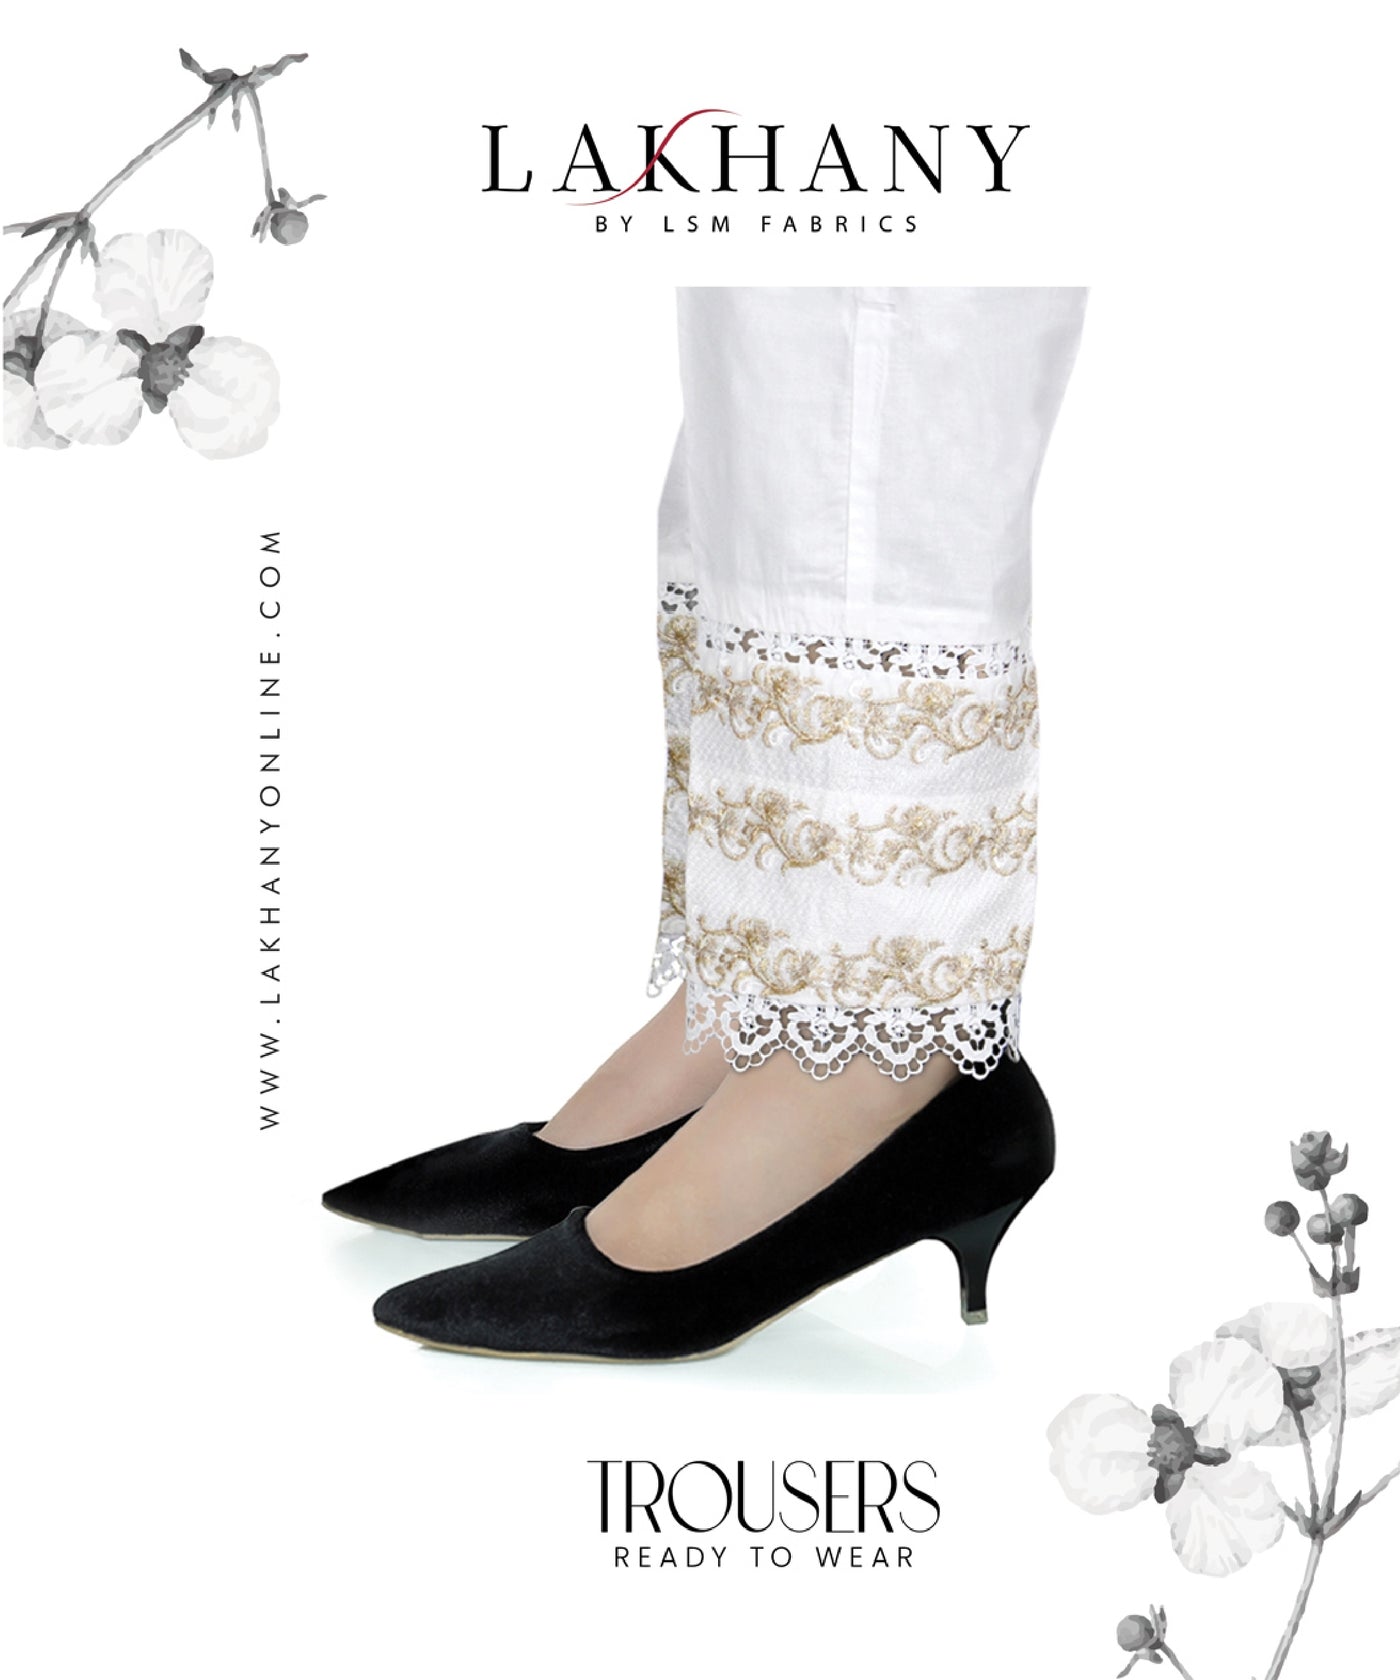 Lakhany 01 Piece Embroidered Stitched Trousers LSM-T-1980-White